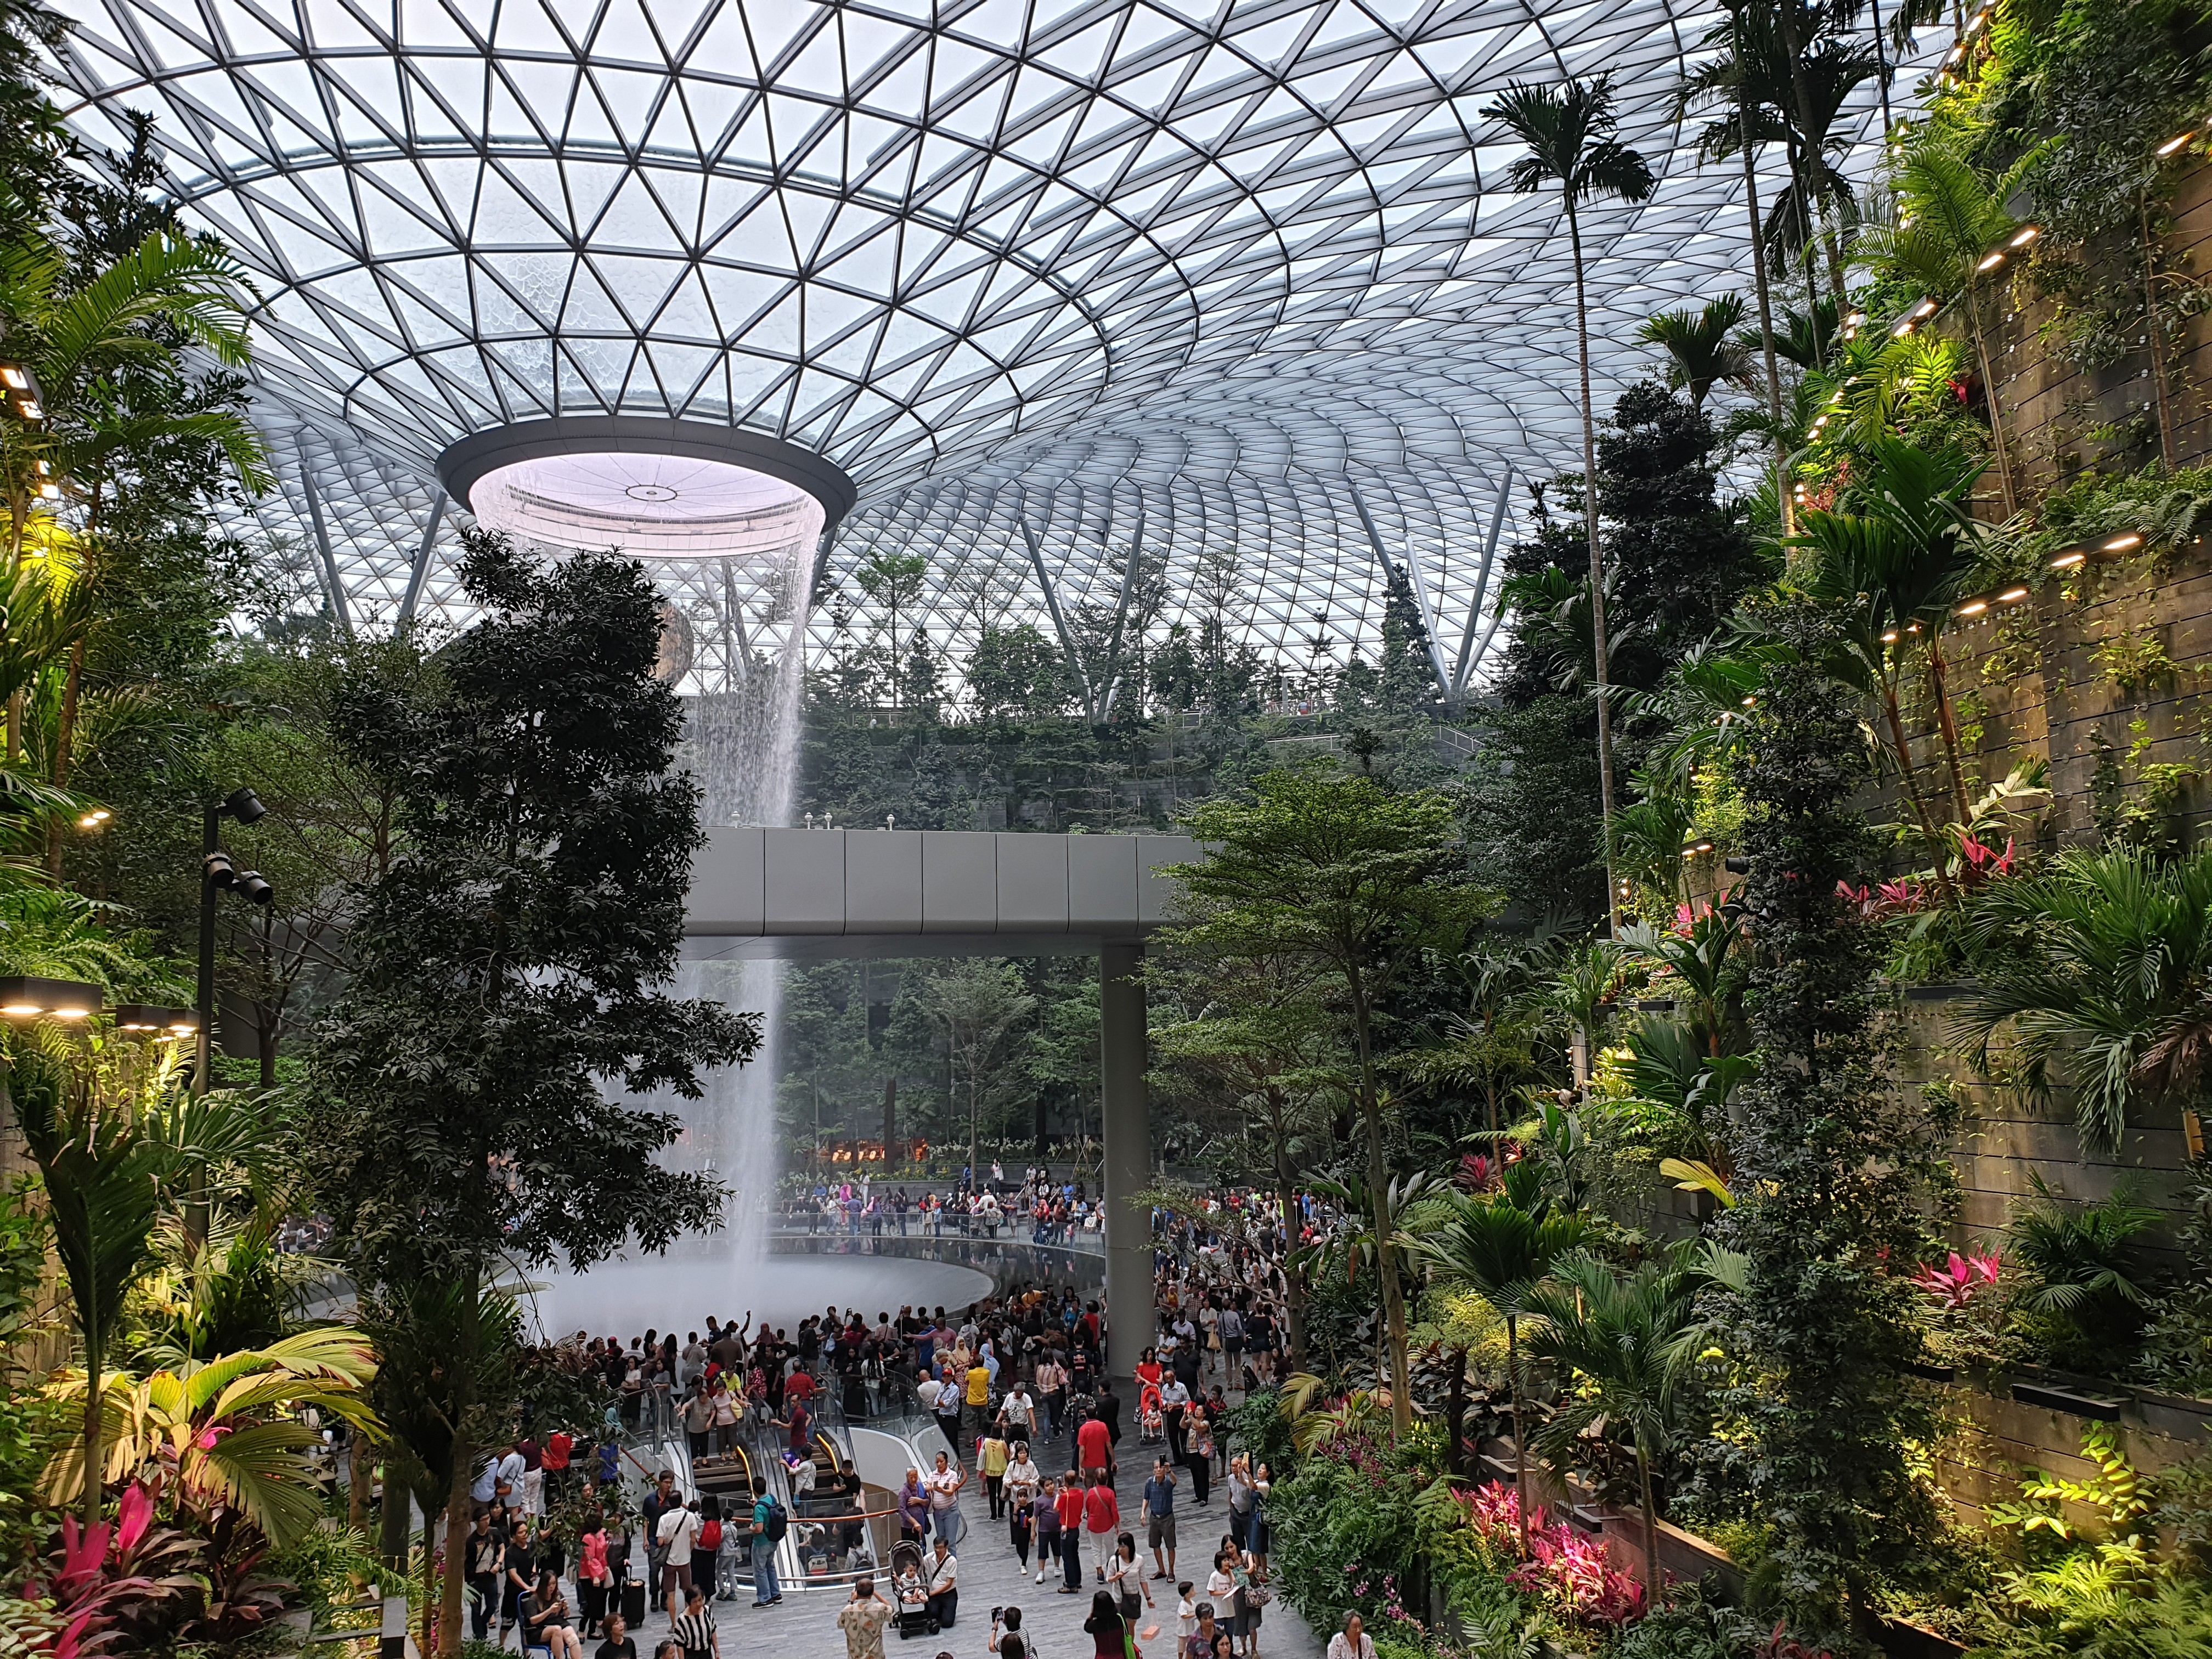 The HSBC Rain Vortex, featuring a 40-metre-high waterfall, is one of the not-to-be missed attractions at the newly opened Jewel Changi Airport – a 10-storey extension to Singapore’s Changi Airport. Photo: Natasha Pack